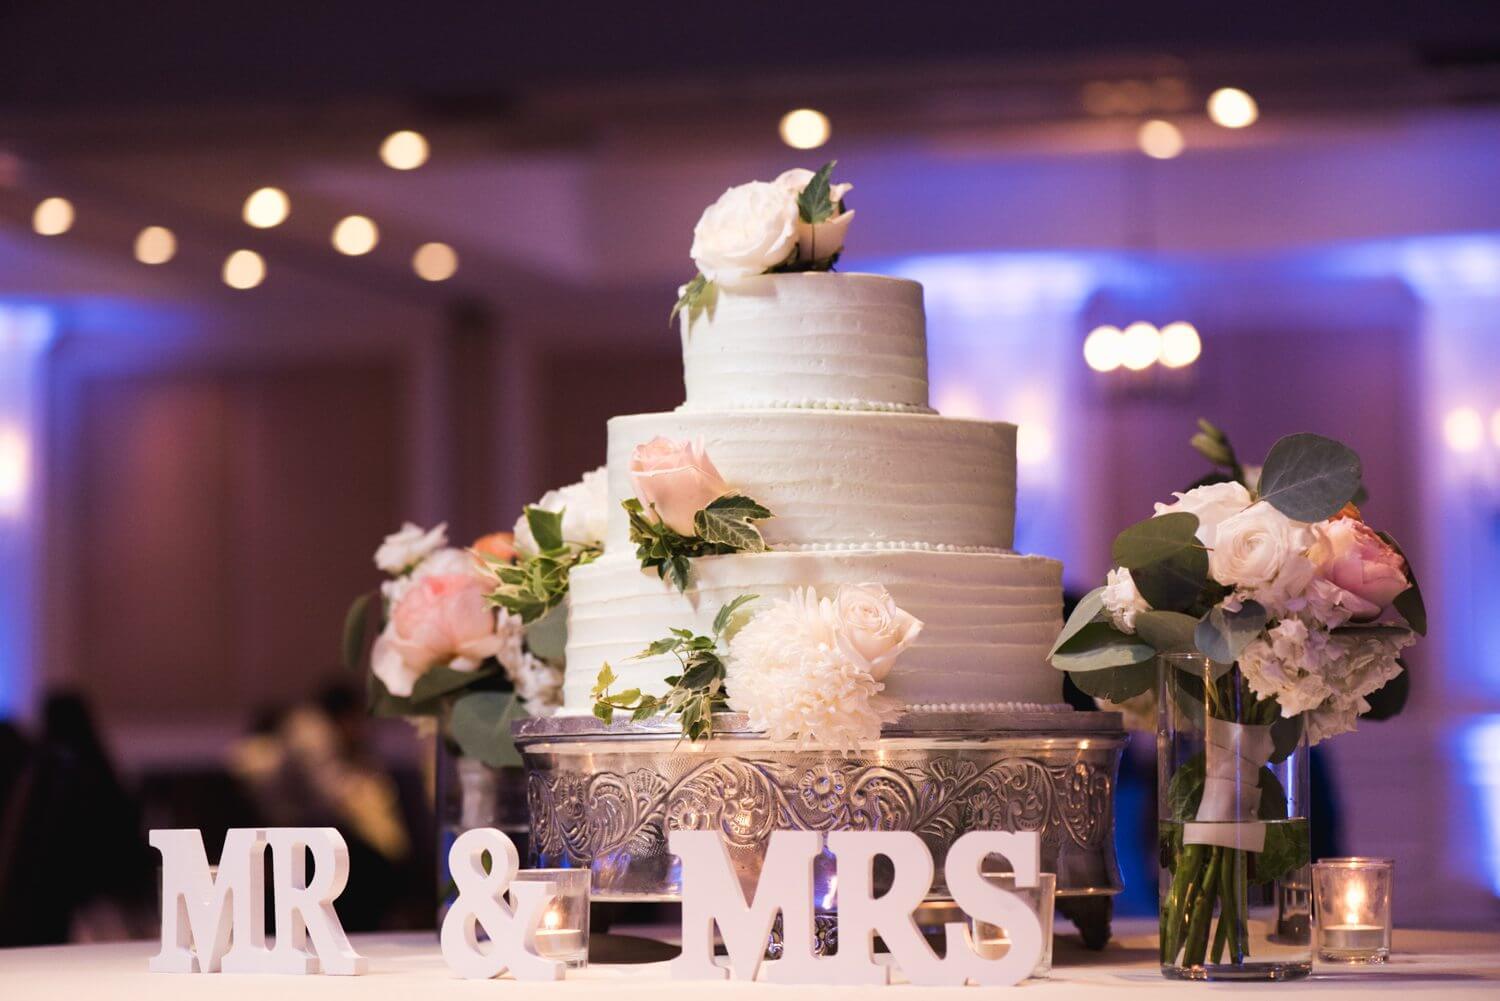 A wedding cake with "mr and mrs" written on it at Marriott Beachside Key West.